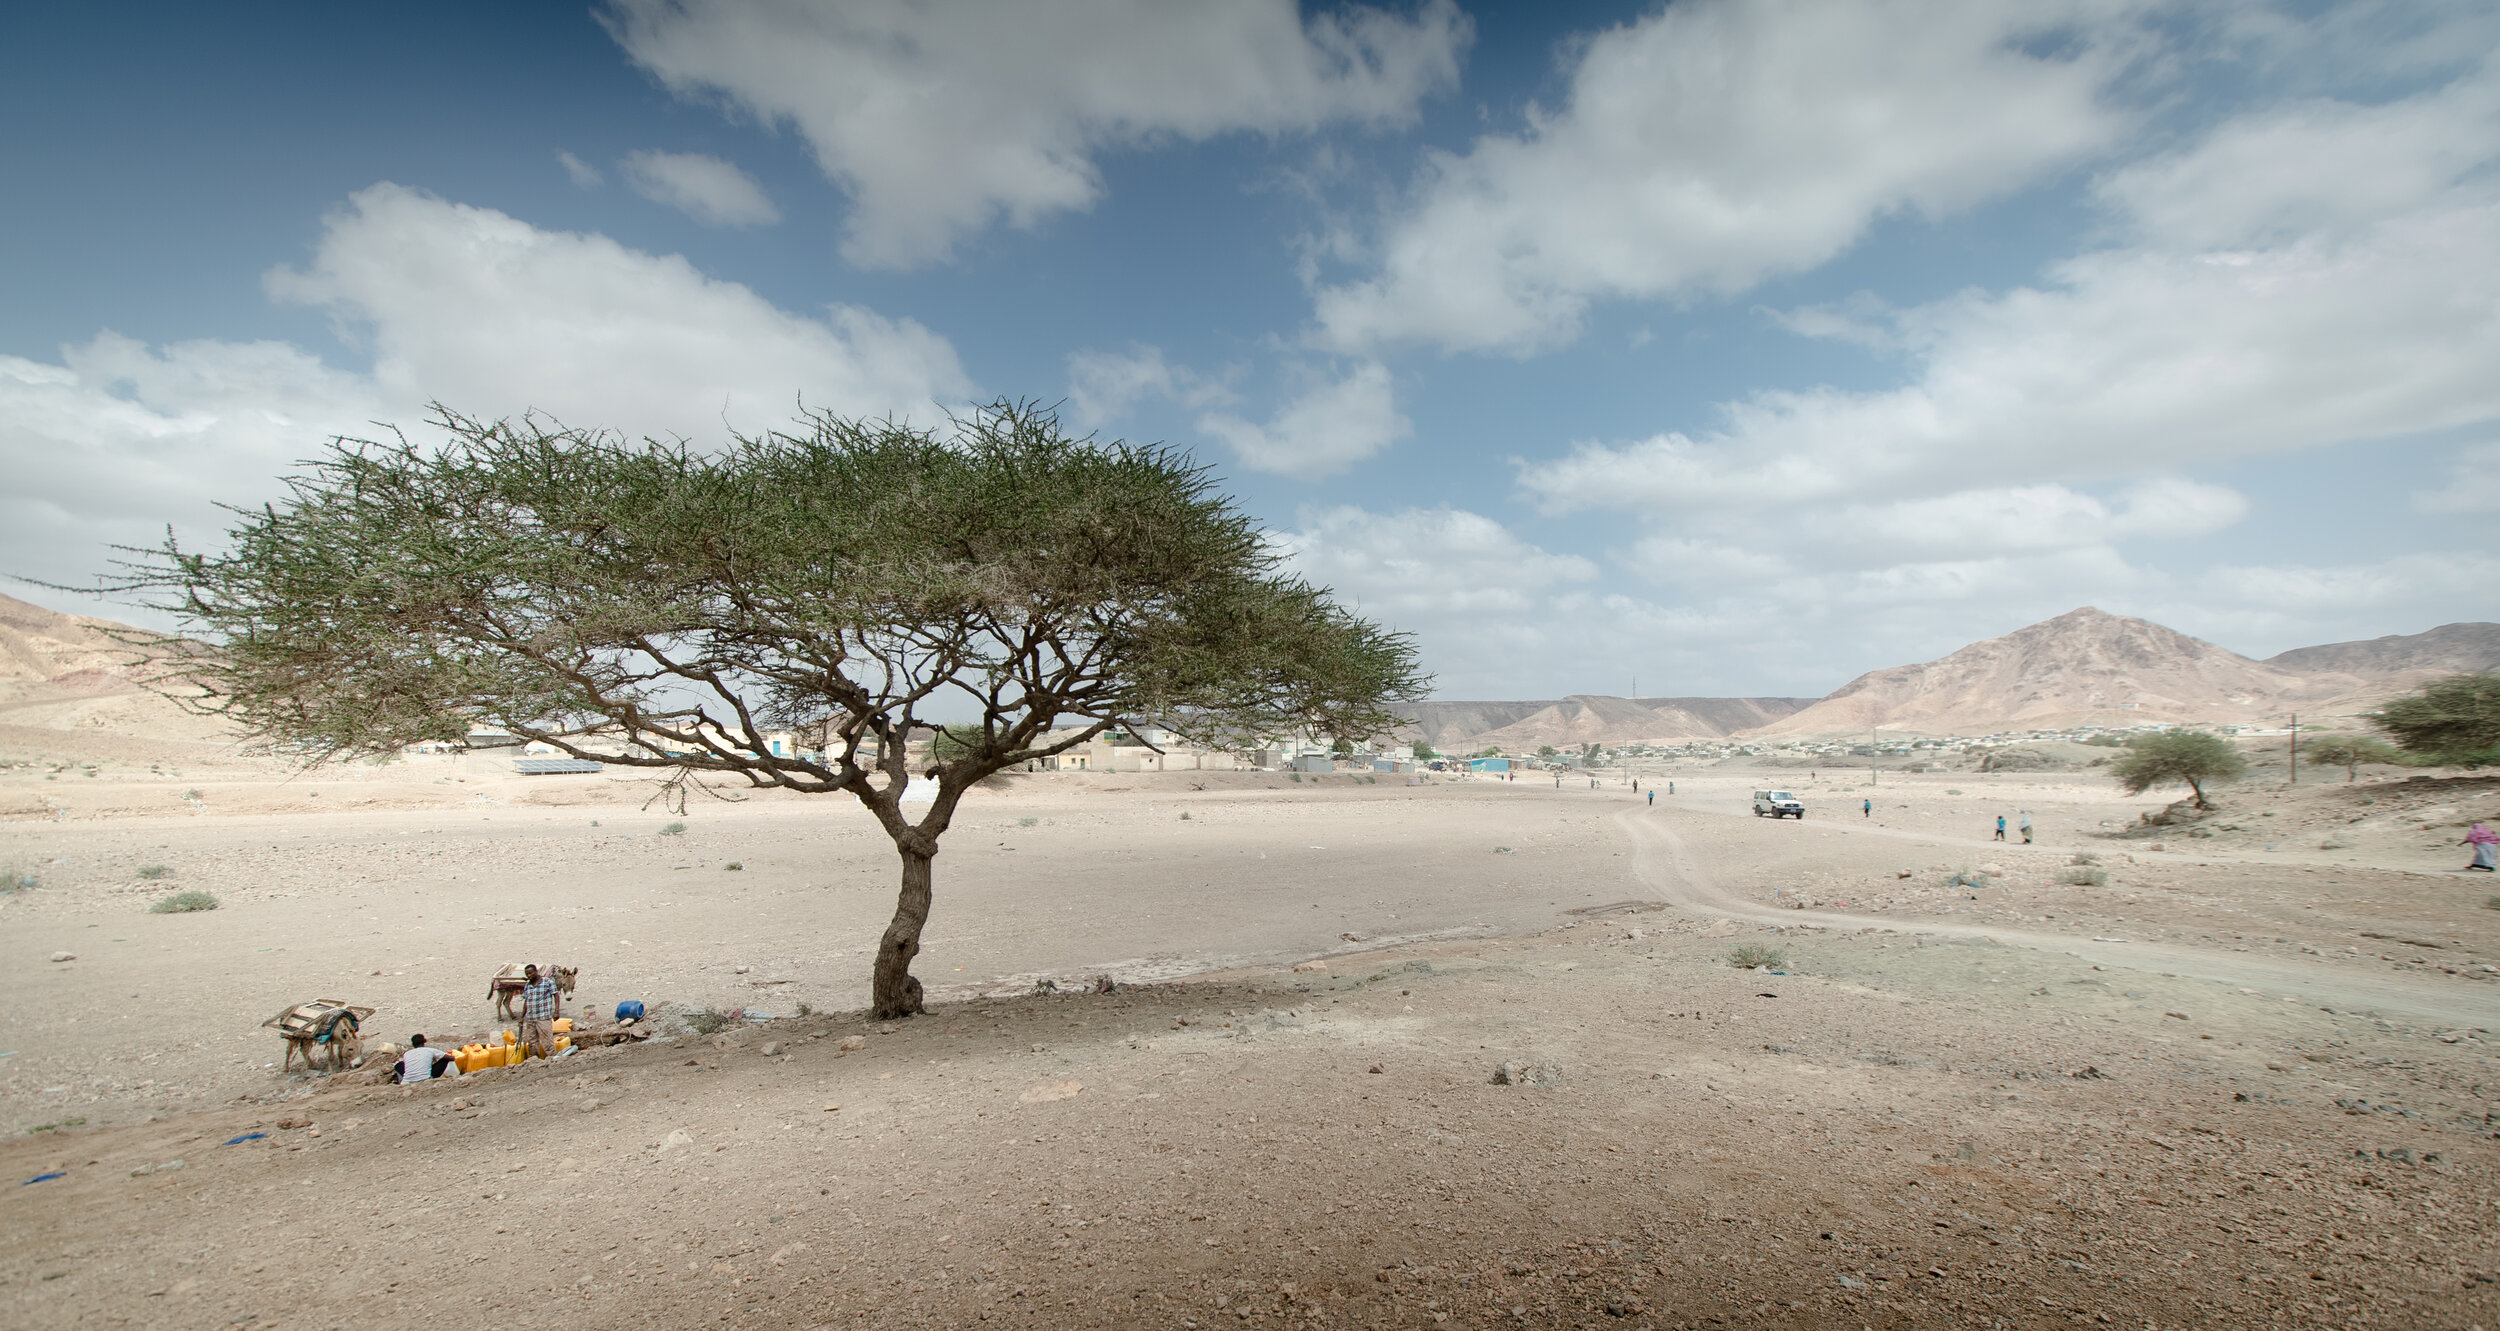  fetching water under the tree at the entrance of Ali-Addeh, Djibouti, 2019 